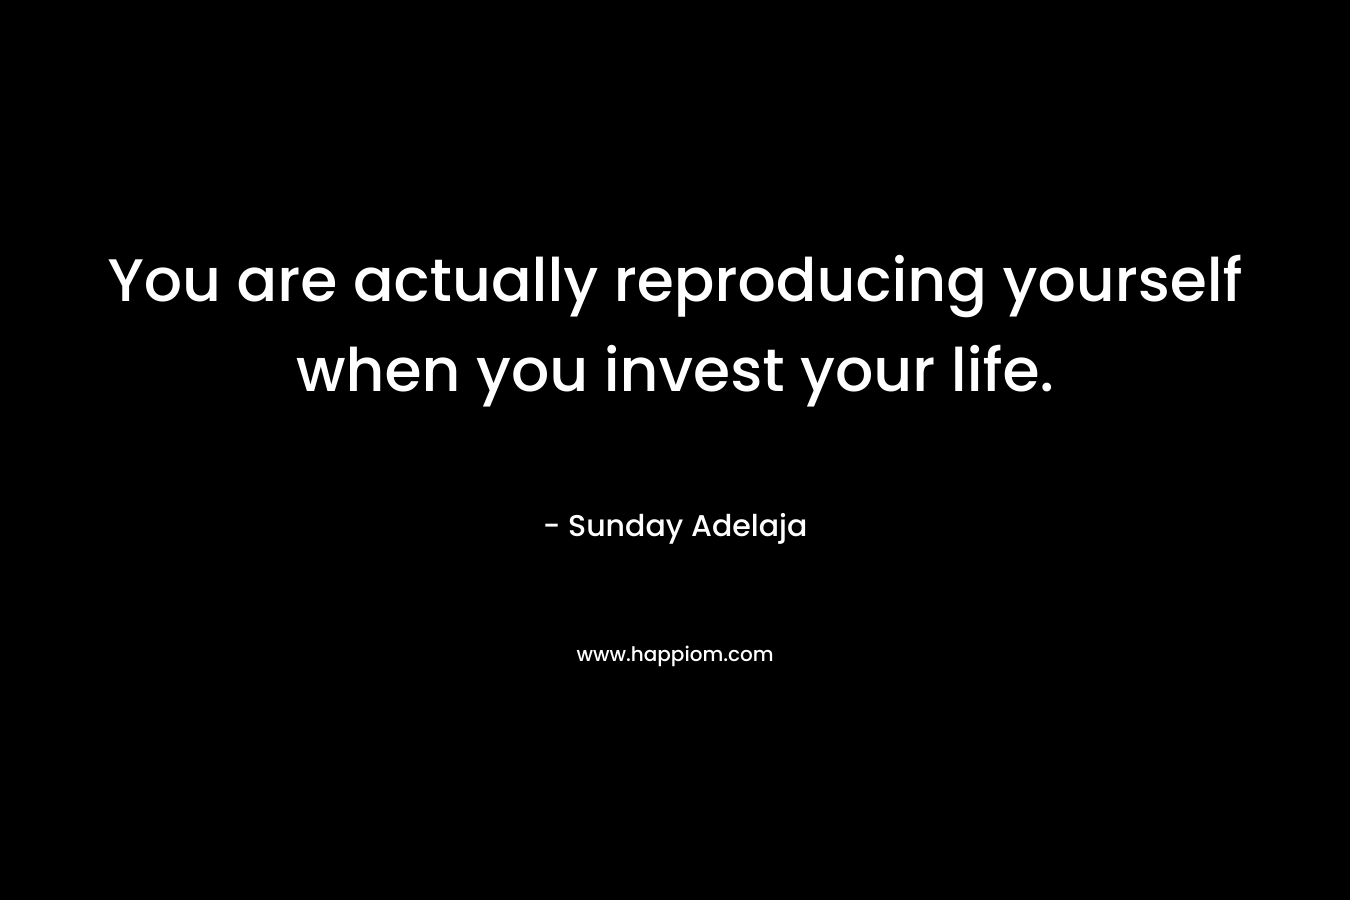 You are actually reproducing yourself when you invest your life.